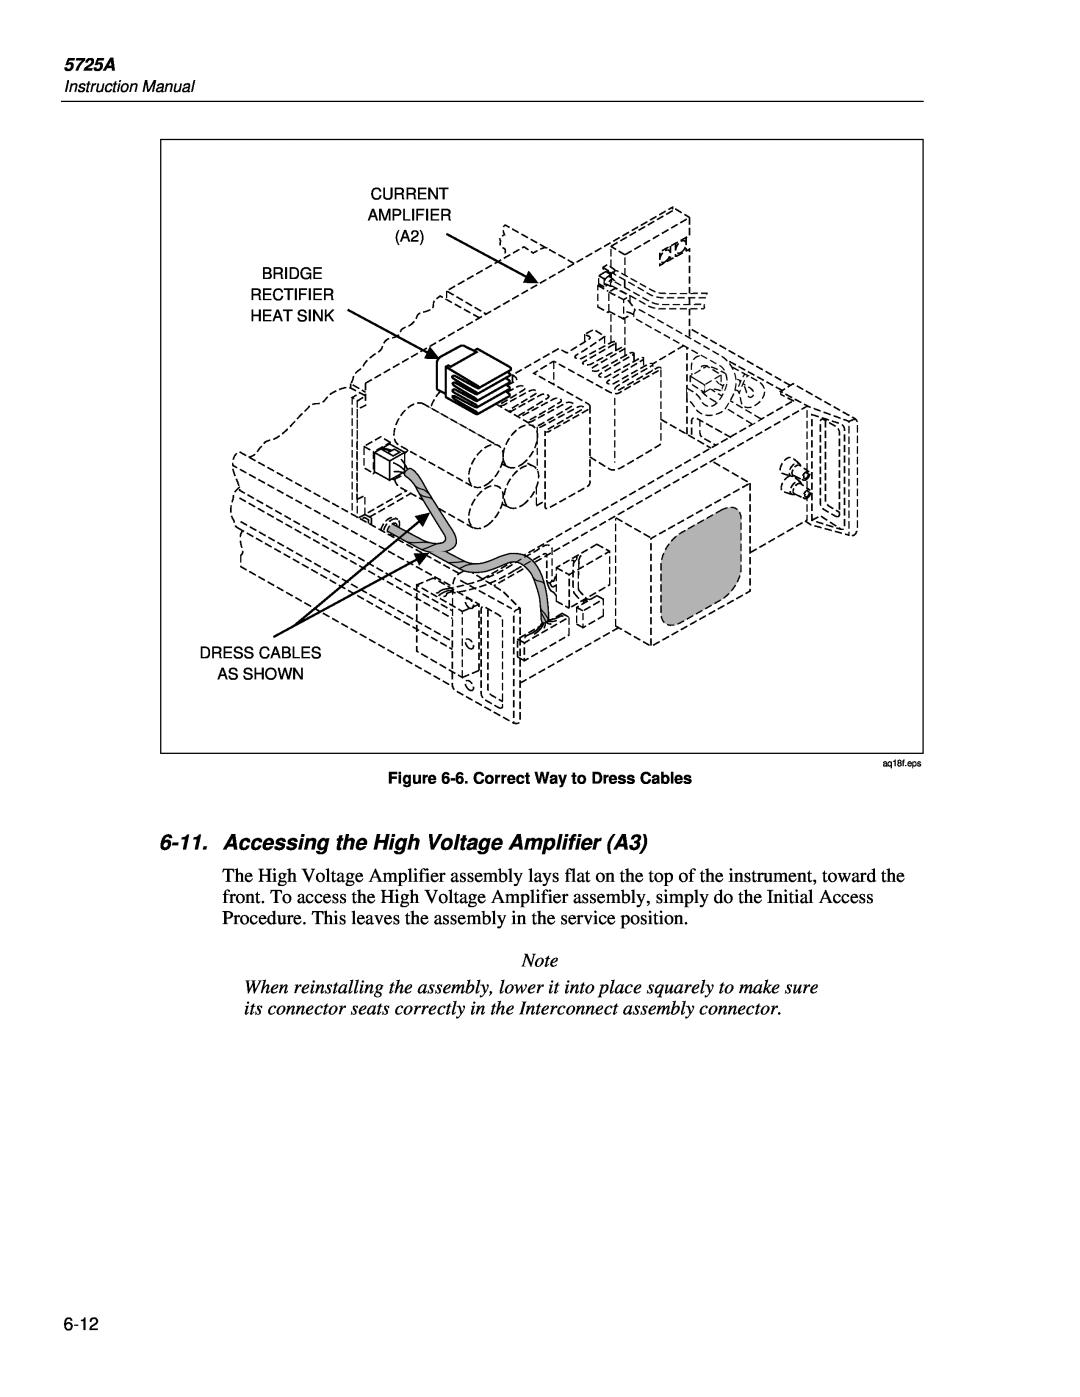 Fluke 5725A instruction manual Accessing the High Voltage Amplifier A3, 6.Correct Way to Dress Cables 